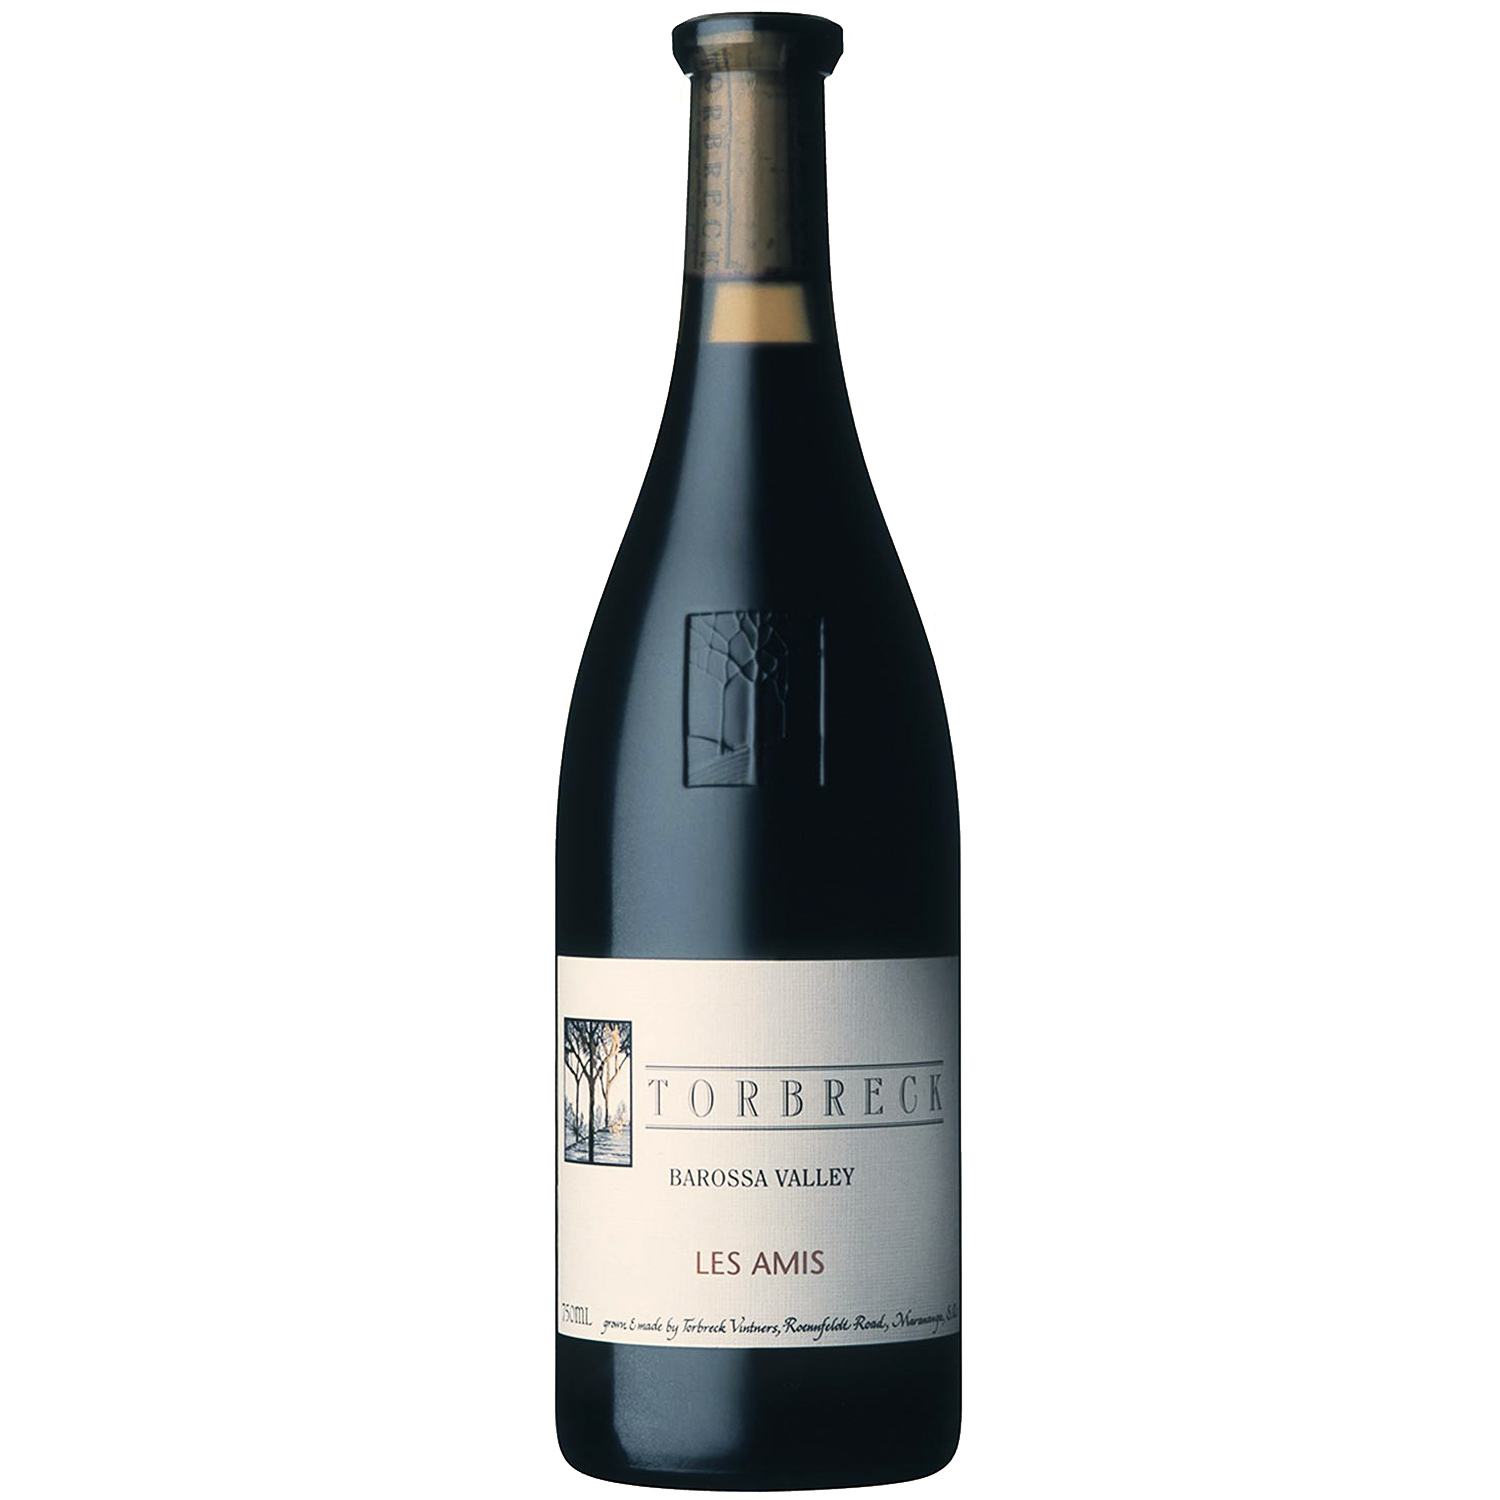 Torbeck Barossa Valley Les Amis 2015